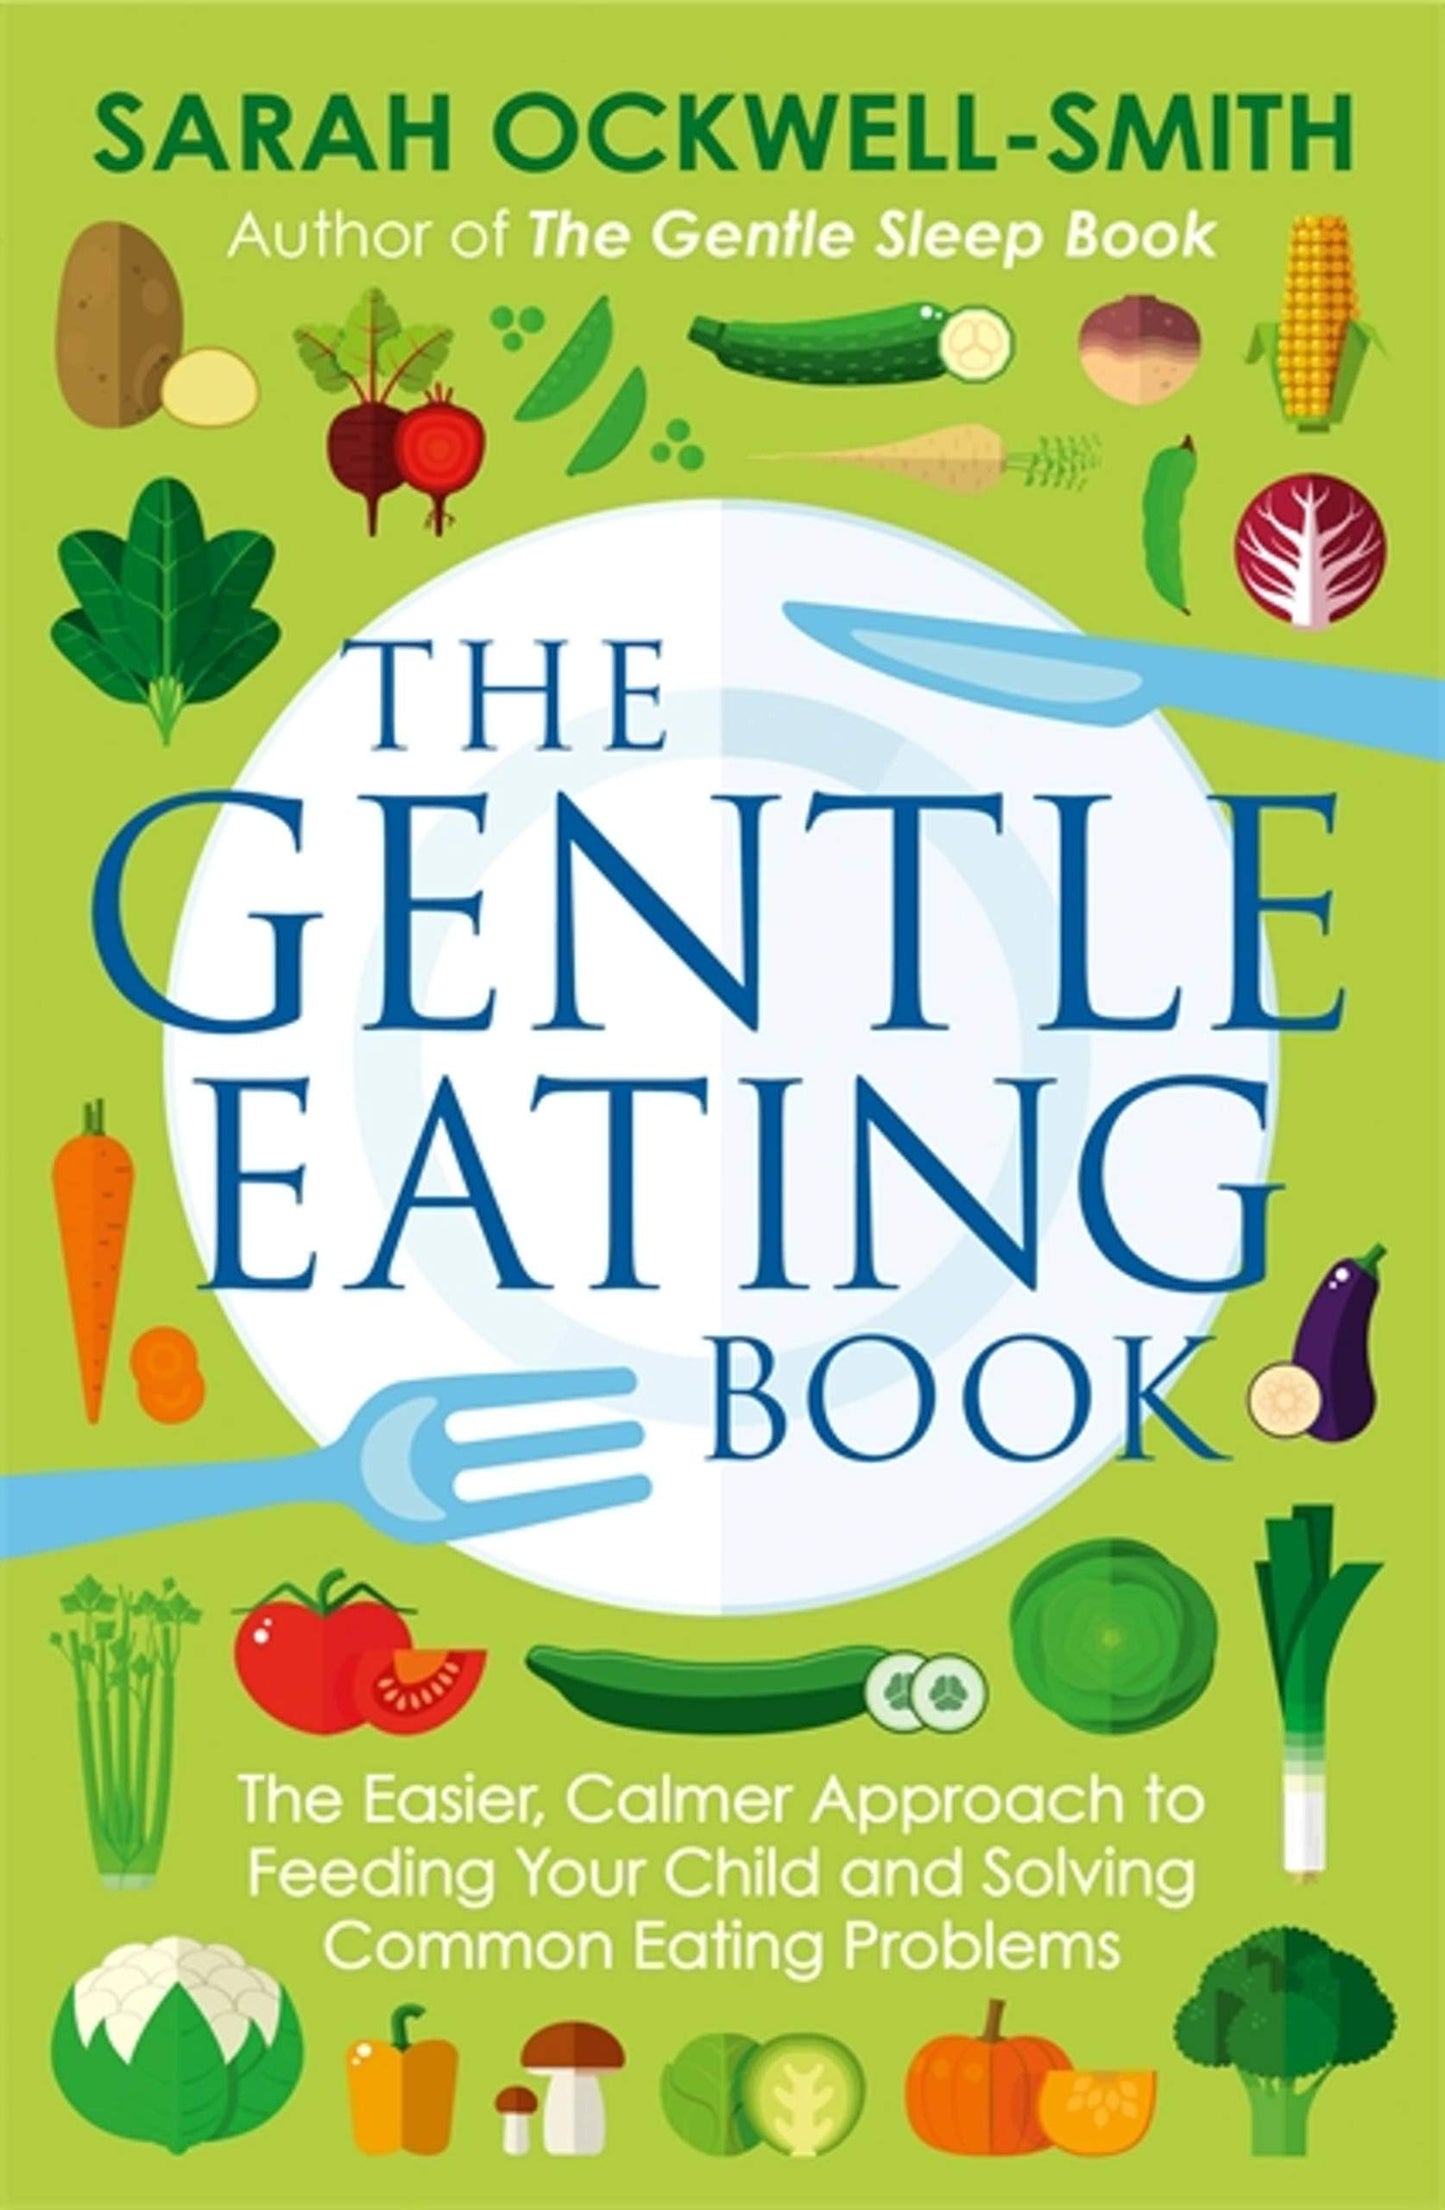 The Gentle Eating Book by Sarah Ockwell-Smith